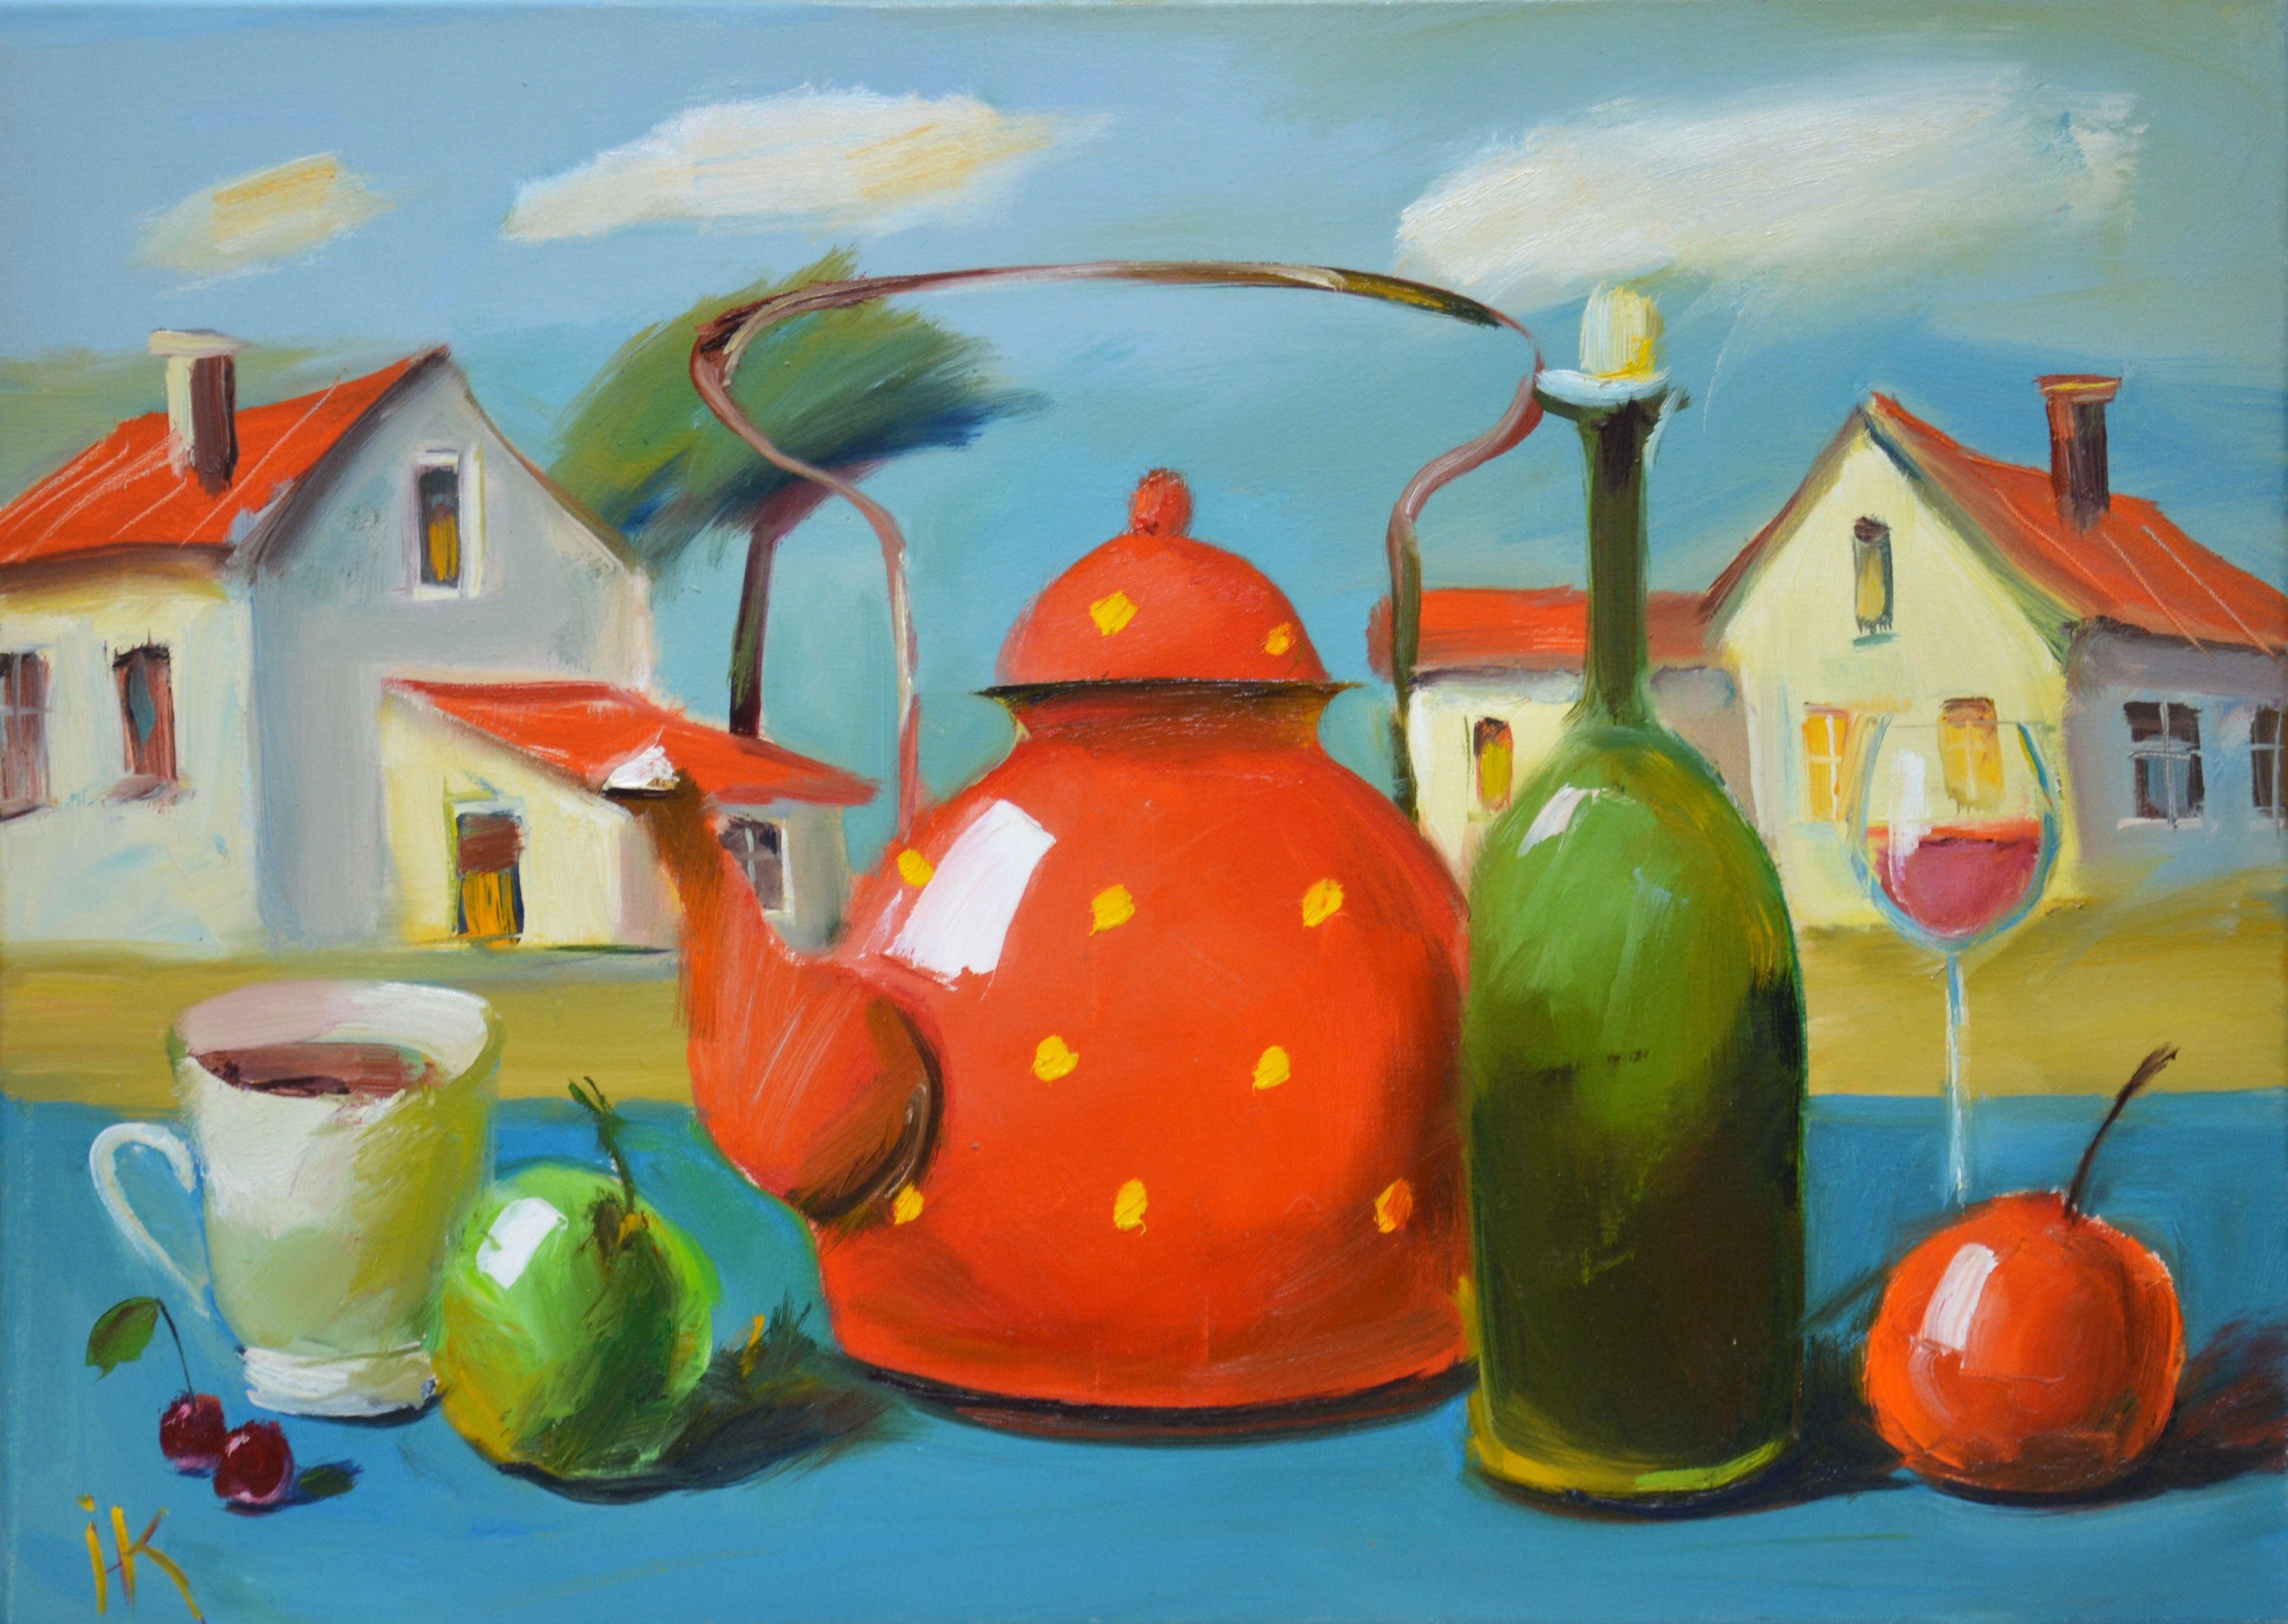 Decorative, modern, expressive still life with a red teapot with polka dots, a bottle of wine, fruits against the backdrop of a street with houses. Part of an ongoing series of colorful decorative still lifes. The picture has good spatial quality,